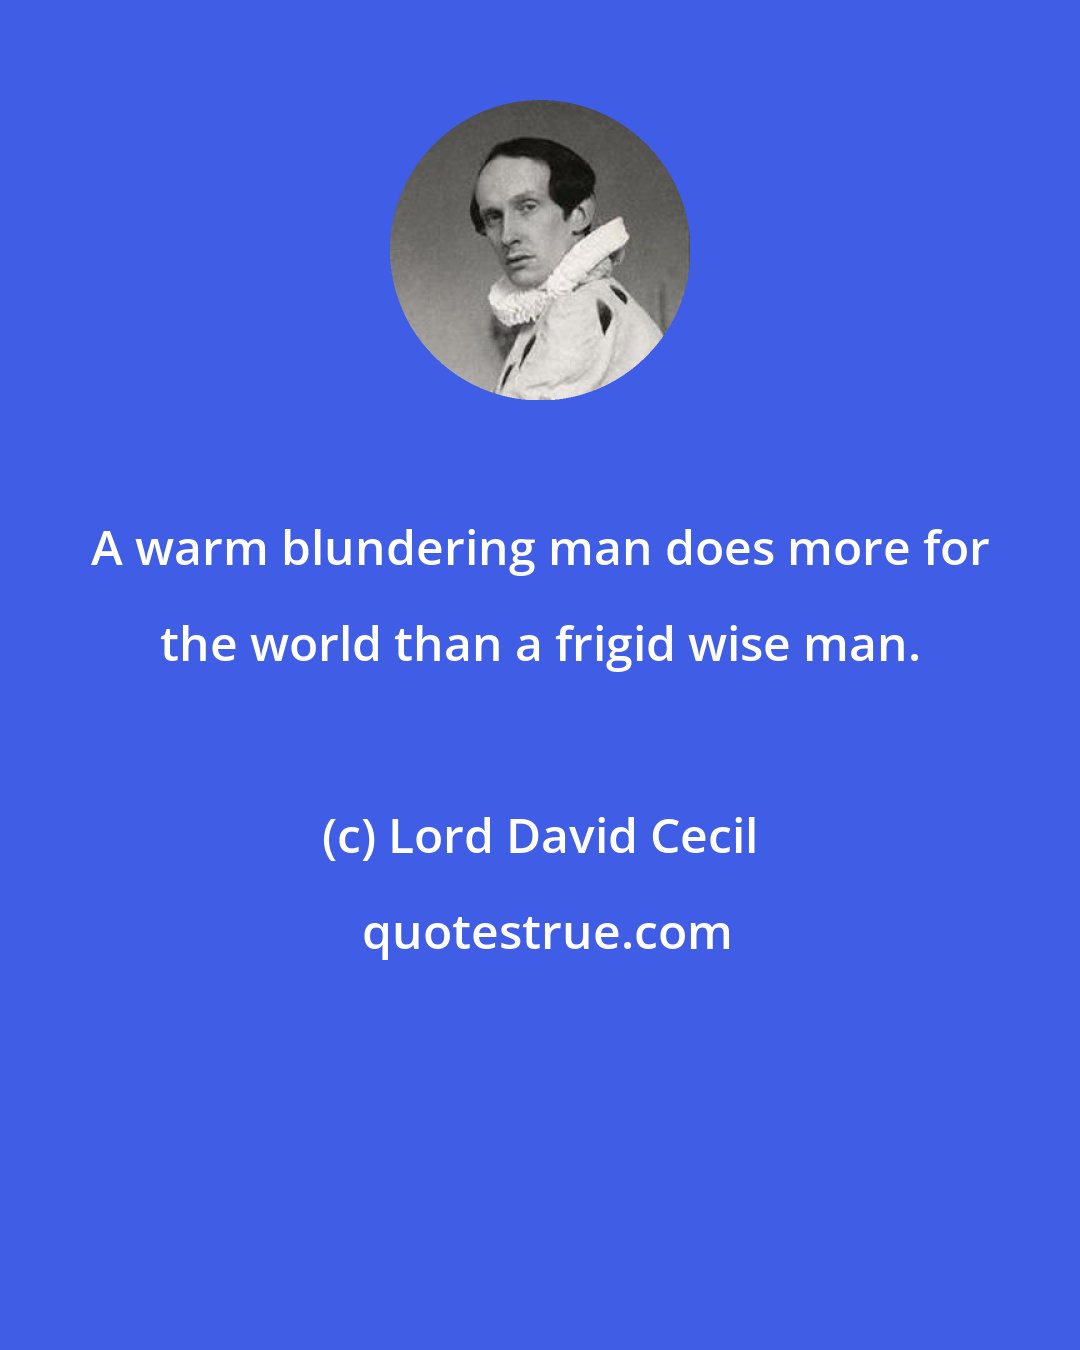 Lord David Cecil: A warm blundering man does more for the world than a frigid wise man.